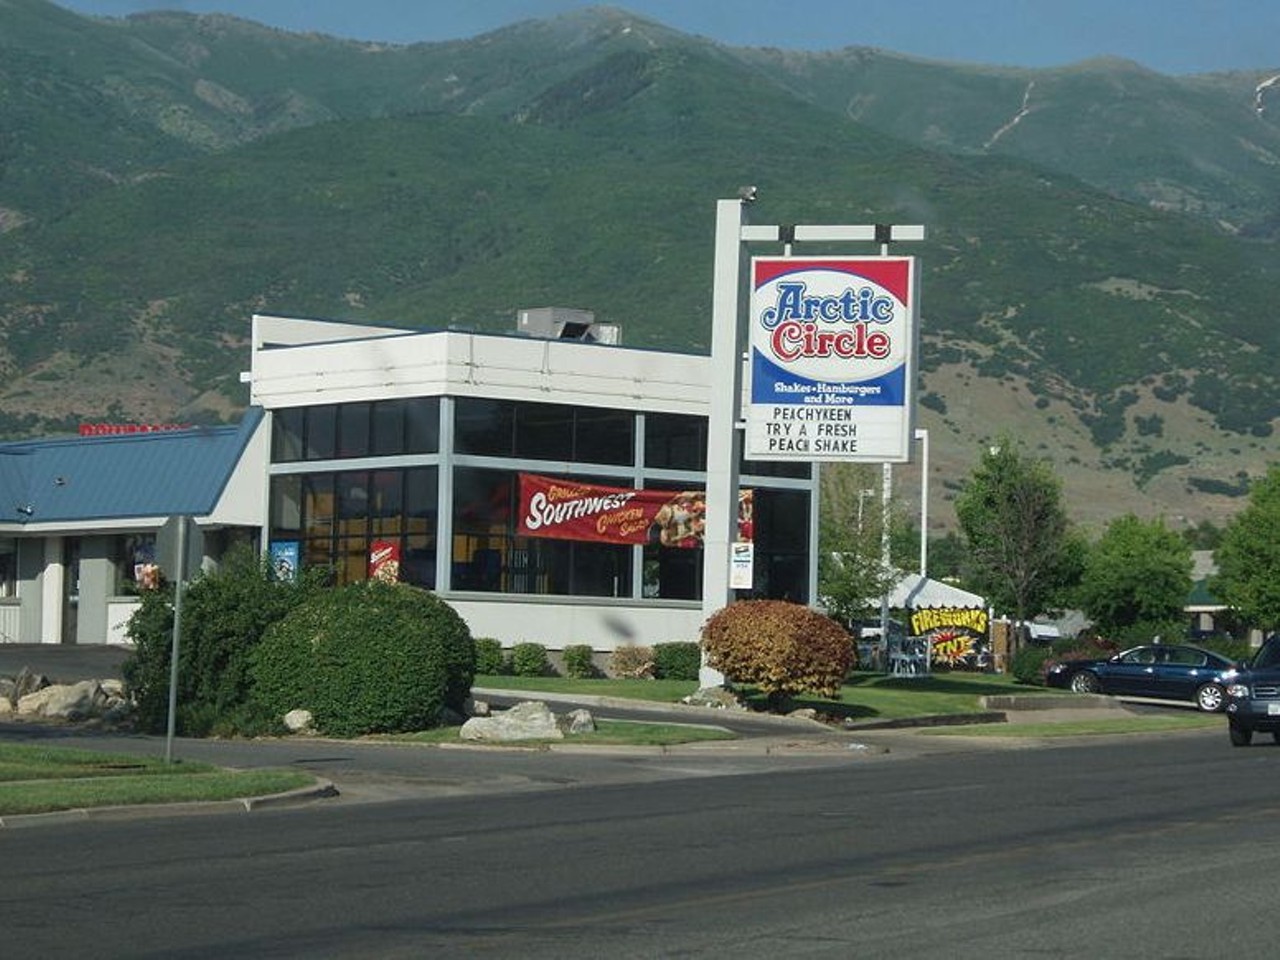 Arctic Circle
Black Angus burgers and real, crispy halibut are just two reasons why we&#146;d love to see this Utah-based franchise make its way south to the City Beautiful. A third reason? Their top-secret FrySauce. 
Photo via Arctice Circle Restaurants/Wikipedia